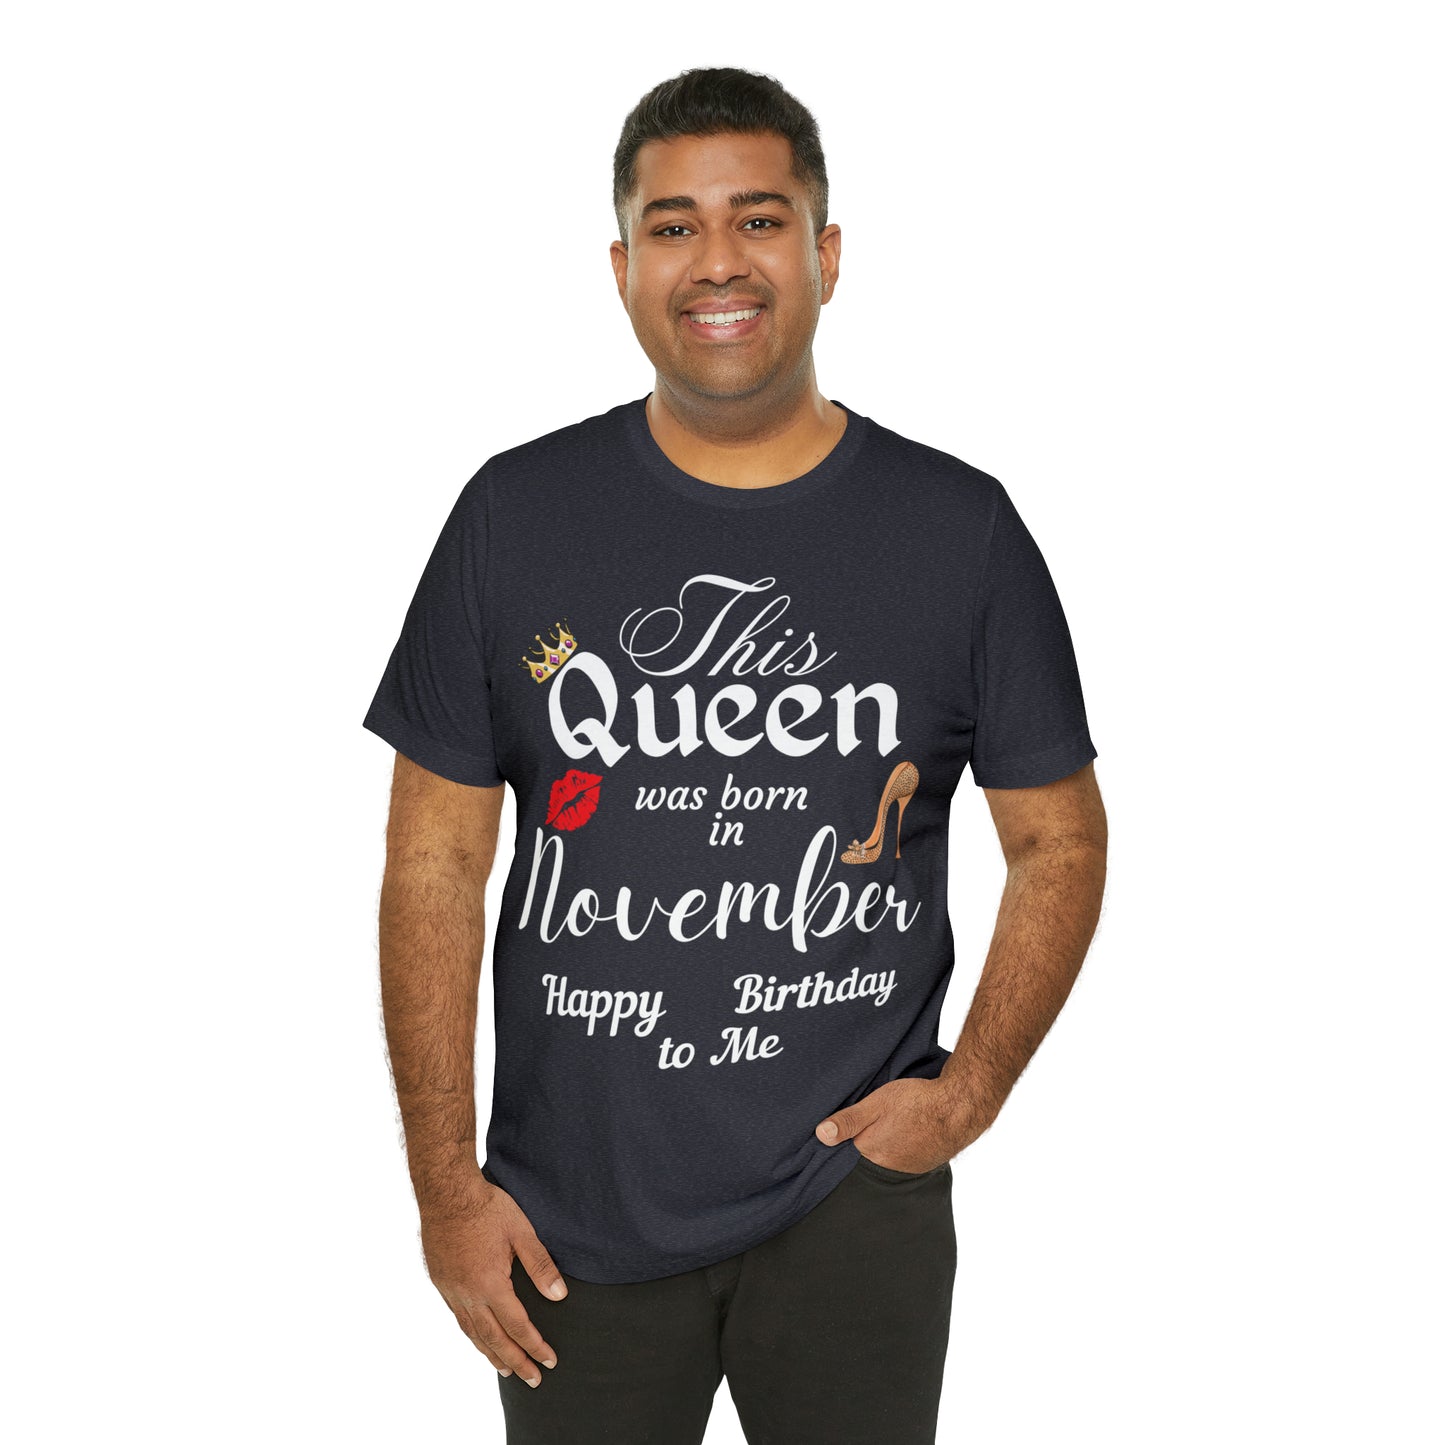 Birthday Queen Shirt, Gift for Birthday, This Queen was born in November Shirt, Funny Queen Shirt, Funny Birthday Shirt, Birthday Gift